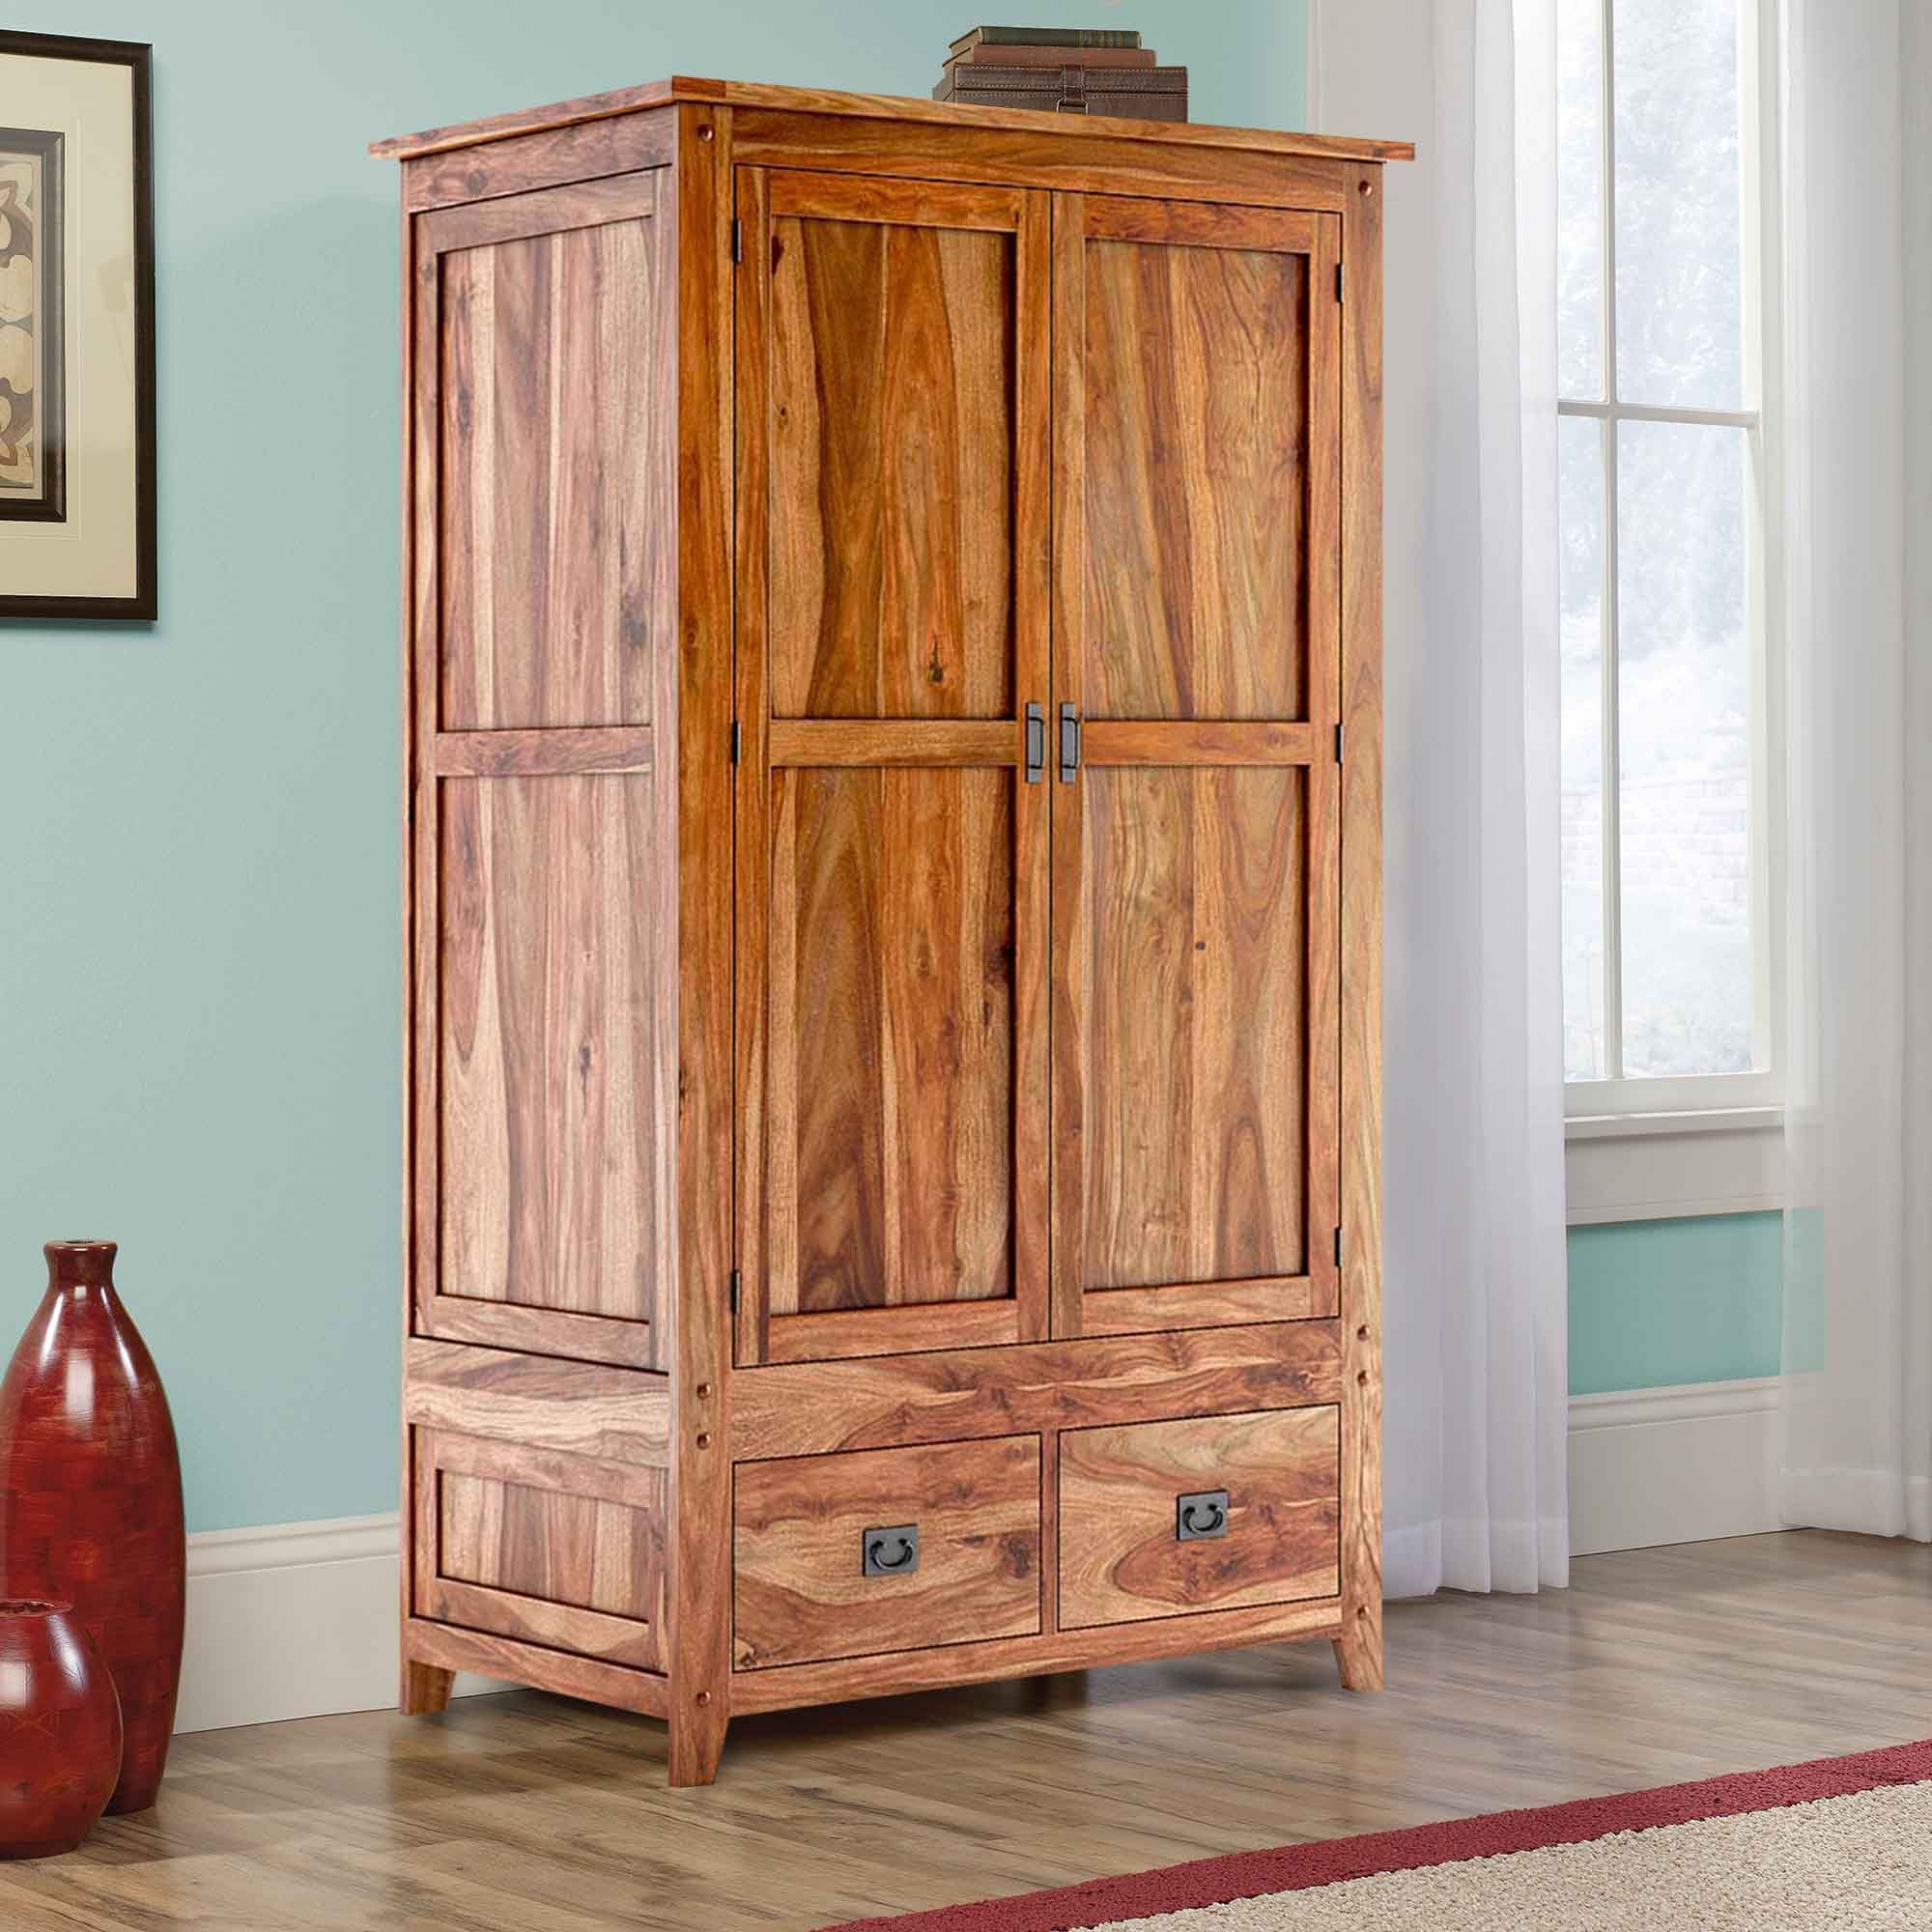 Delaware Farmhouse Solid Wood Wardrobe Armoire With Drawers Throughout Cheap Wooden Wardrobes (Gallery 3 of 20)